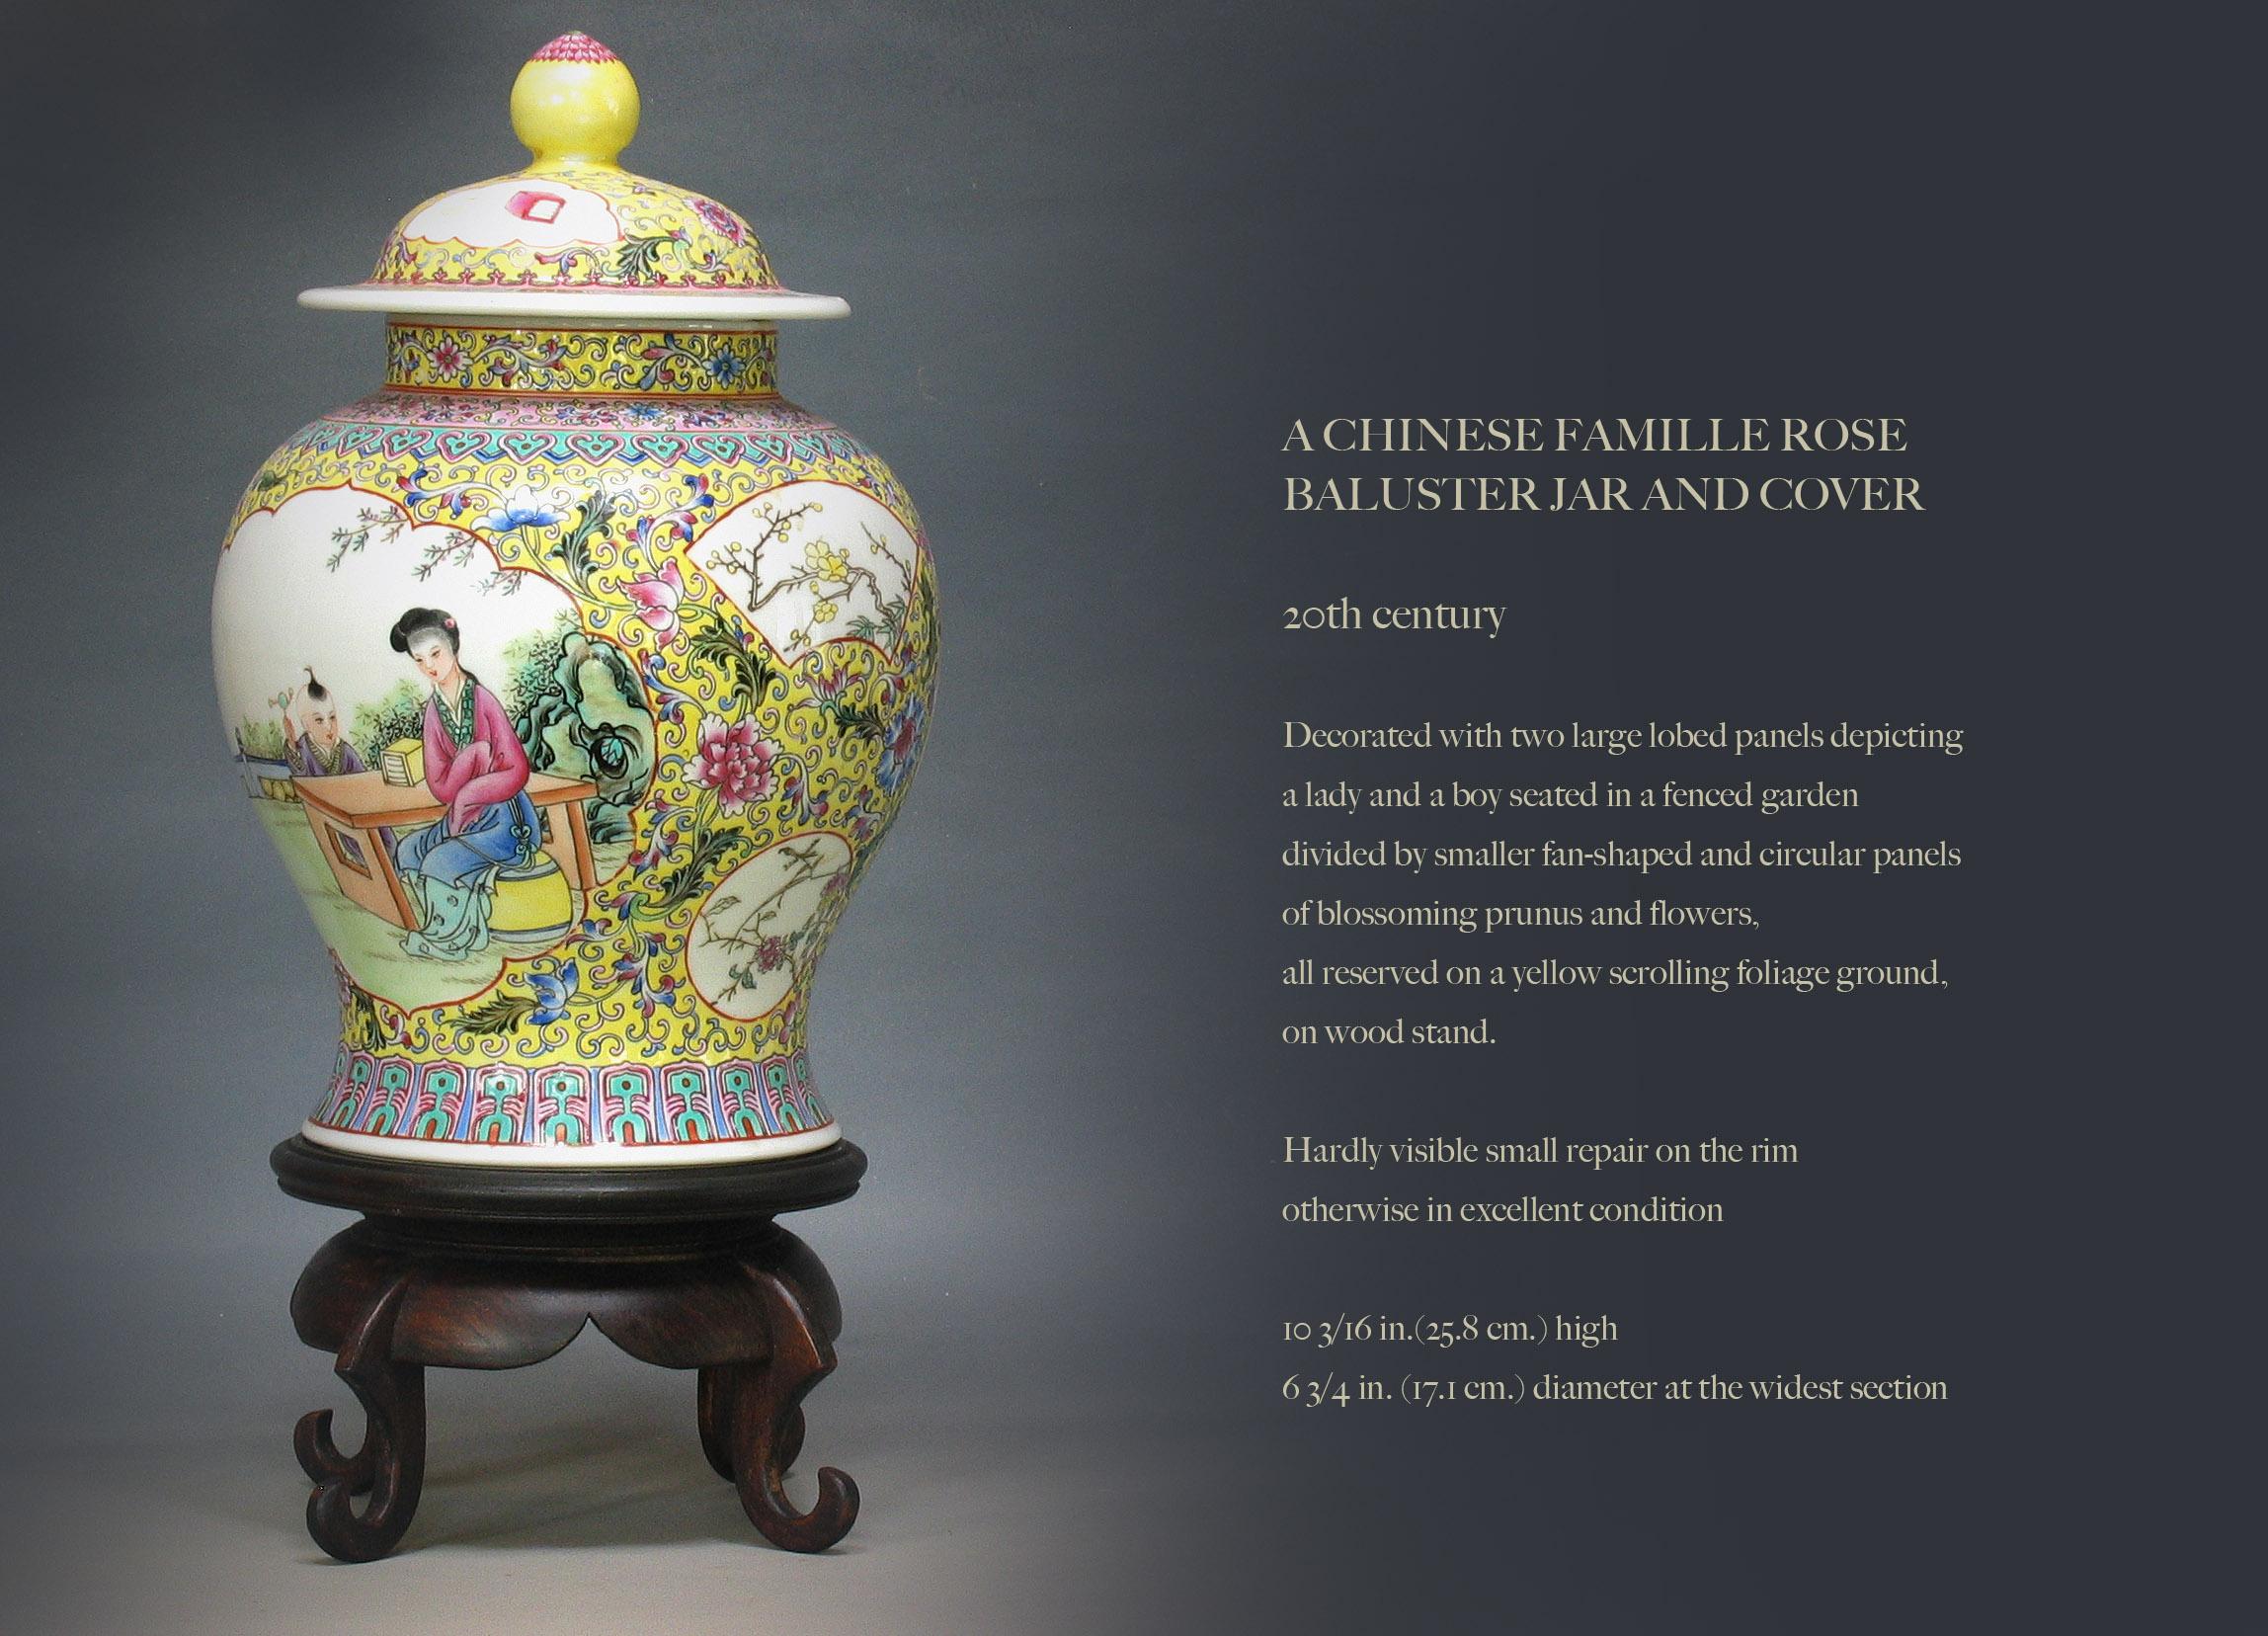 A Chinese famille rose
Baluster jar and cover

20th century.

Decorated with two large lobed panels depicting 
a lady and a boy seated in a fenced garden  
divided by smaller fan-shaped and circular panels 
of blossoming prunus and flowers,